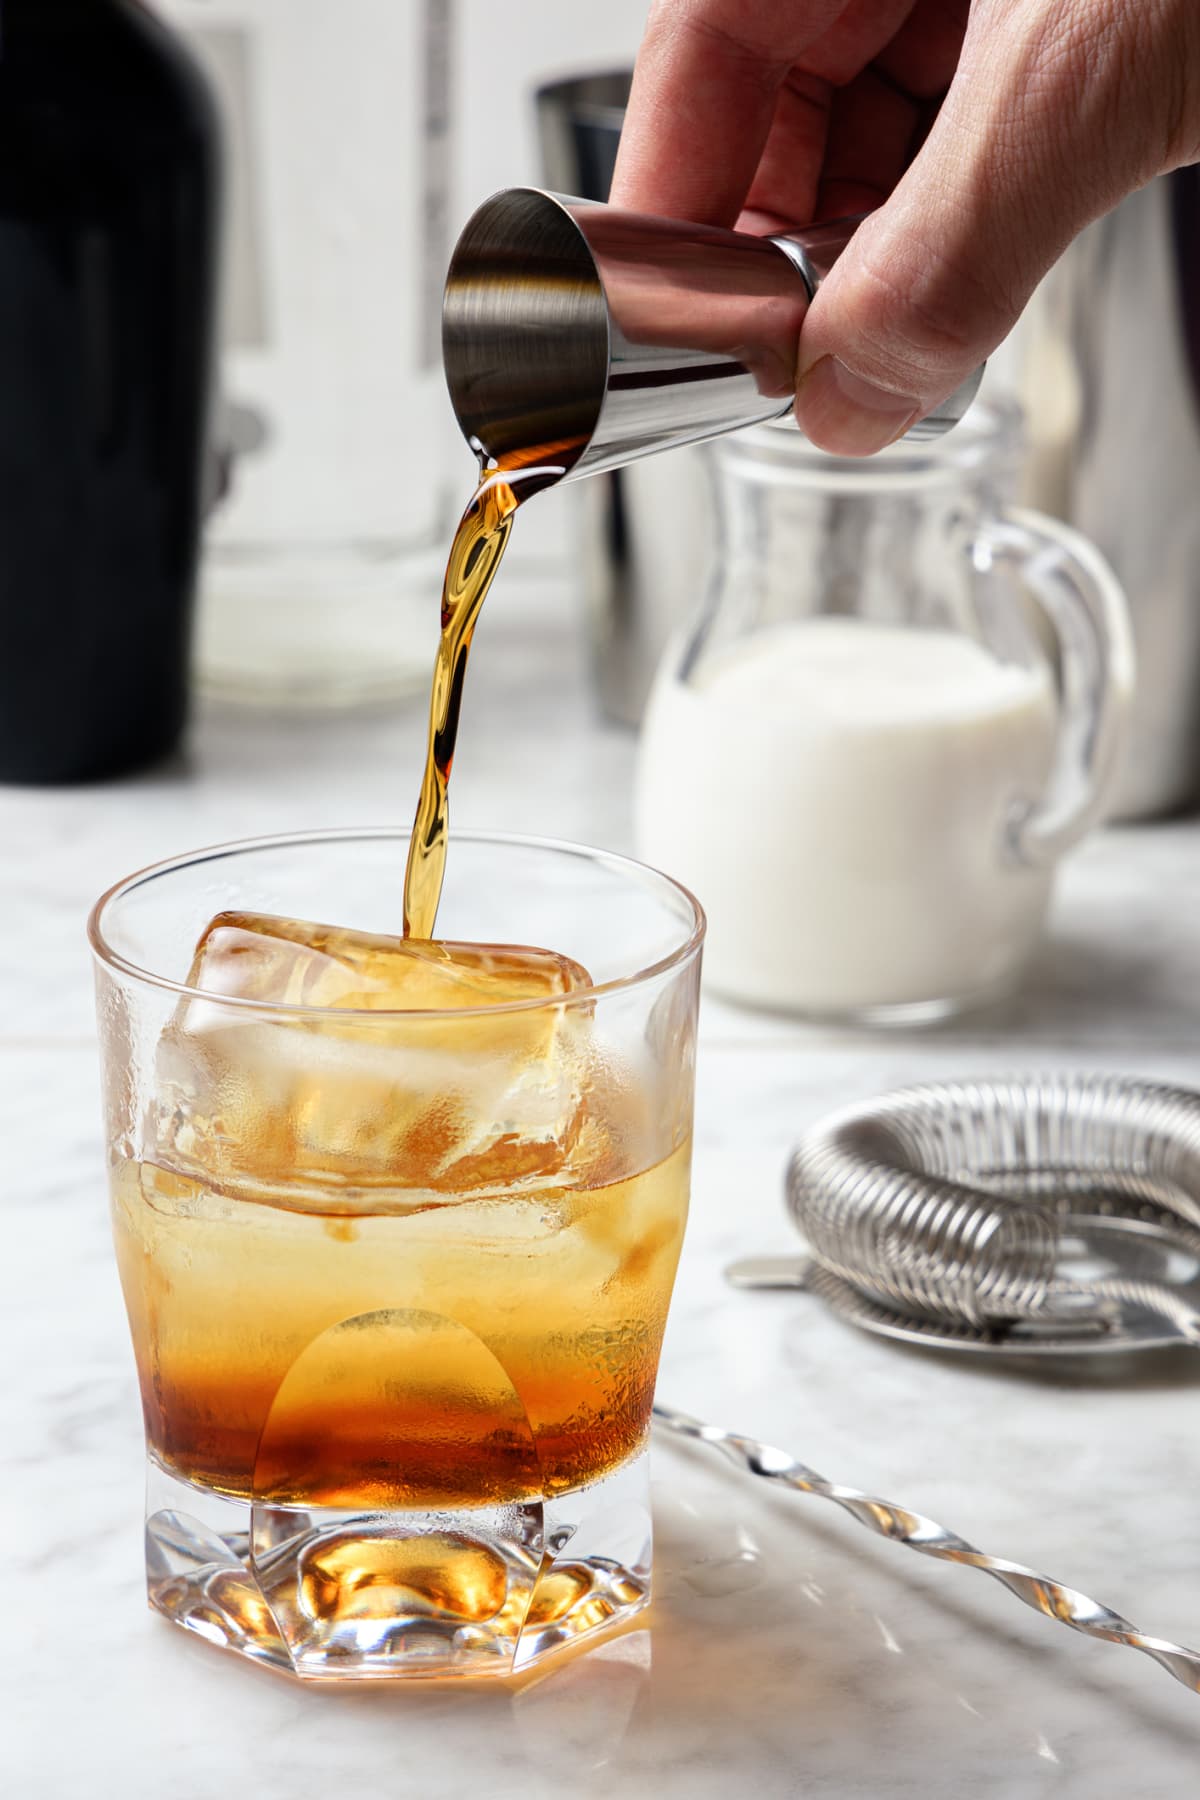 Man's hand pouring coffee liquor into a glass with ice. White Russian cocktail preparation